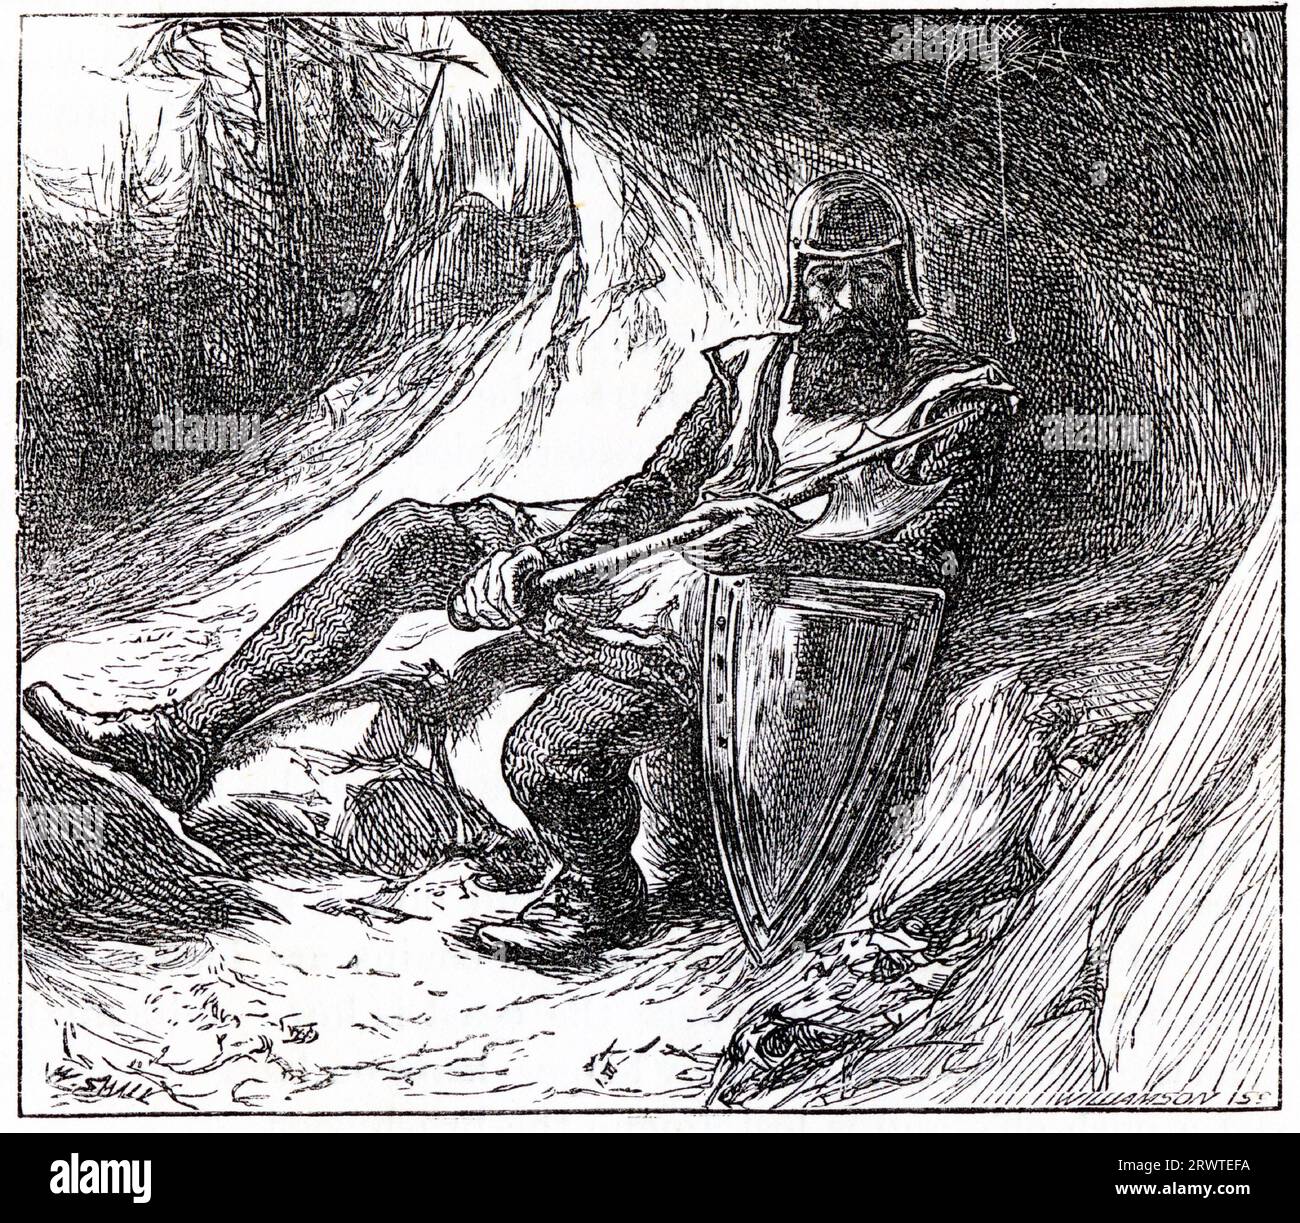 Engraving of Robert the Bruce gaining inspiration from a persistent spider to keep fighting the English Stock Photo